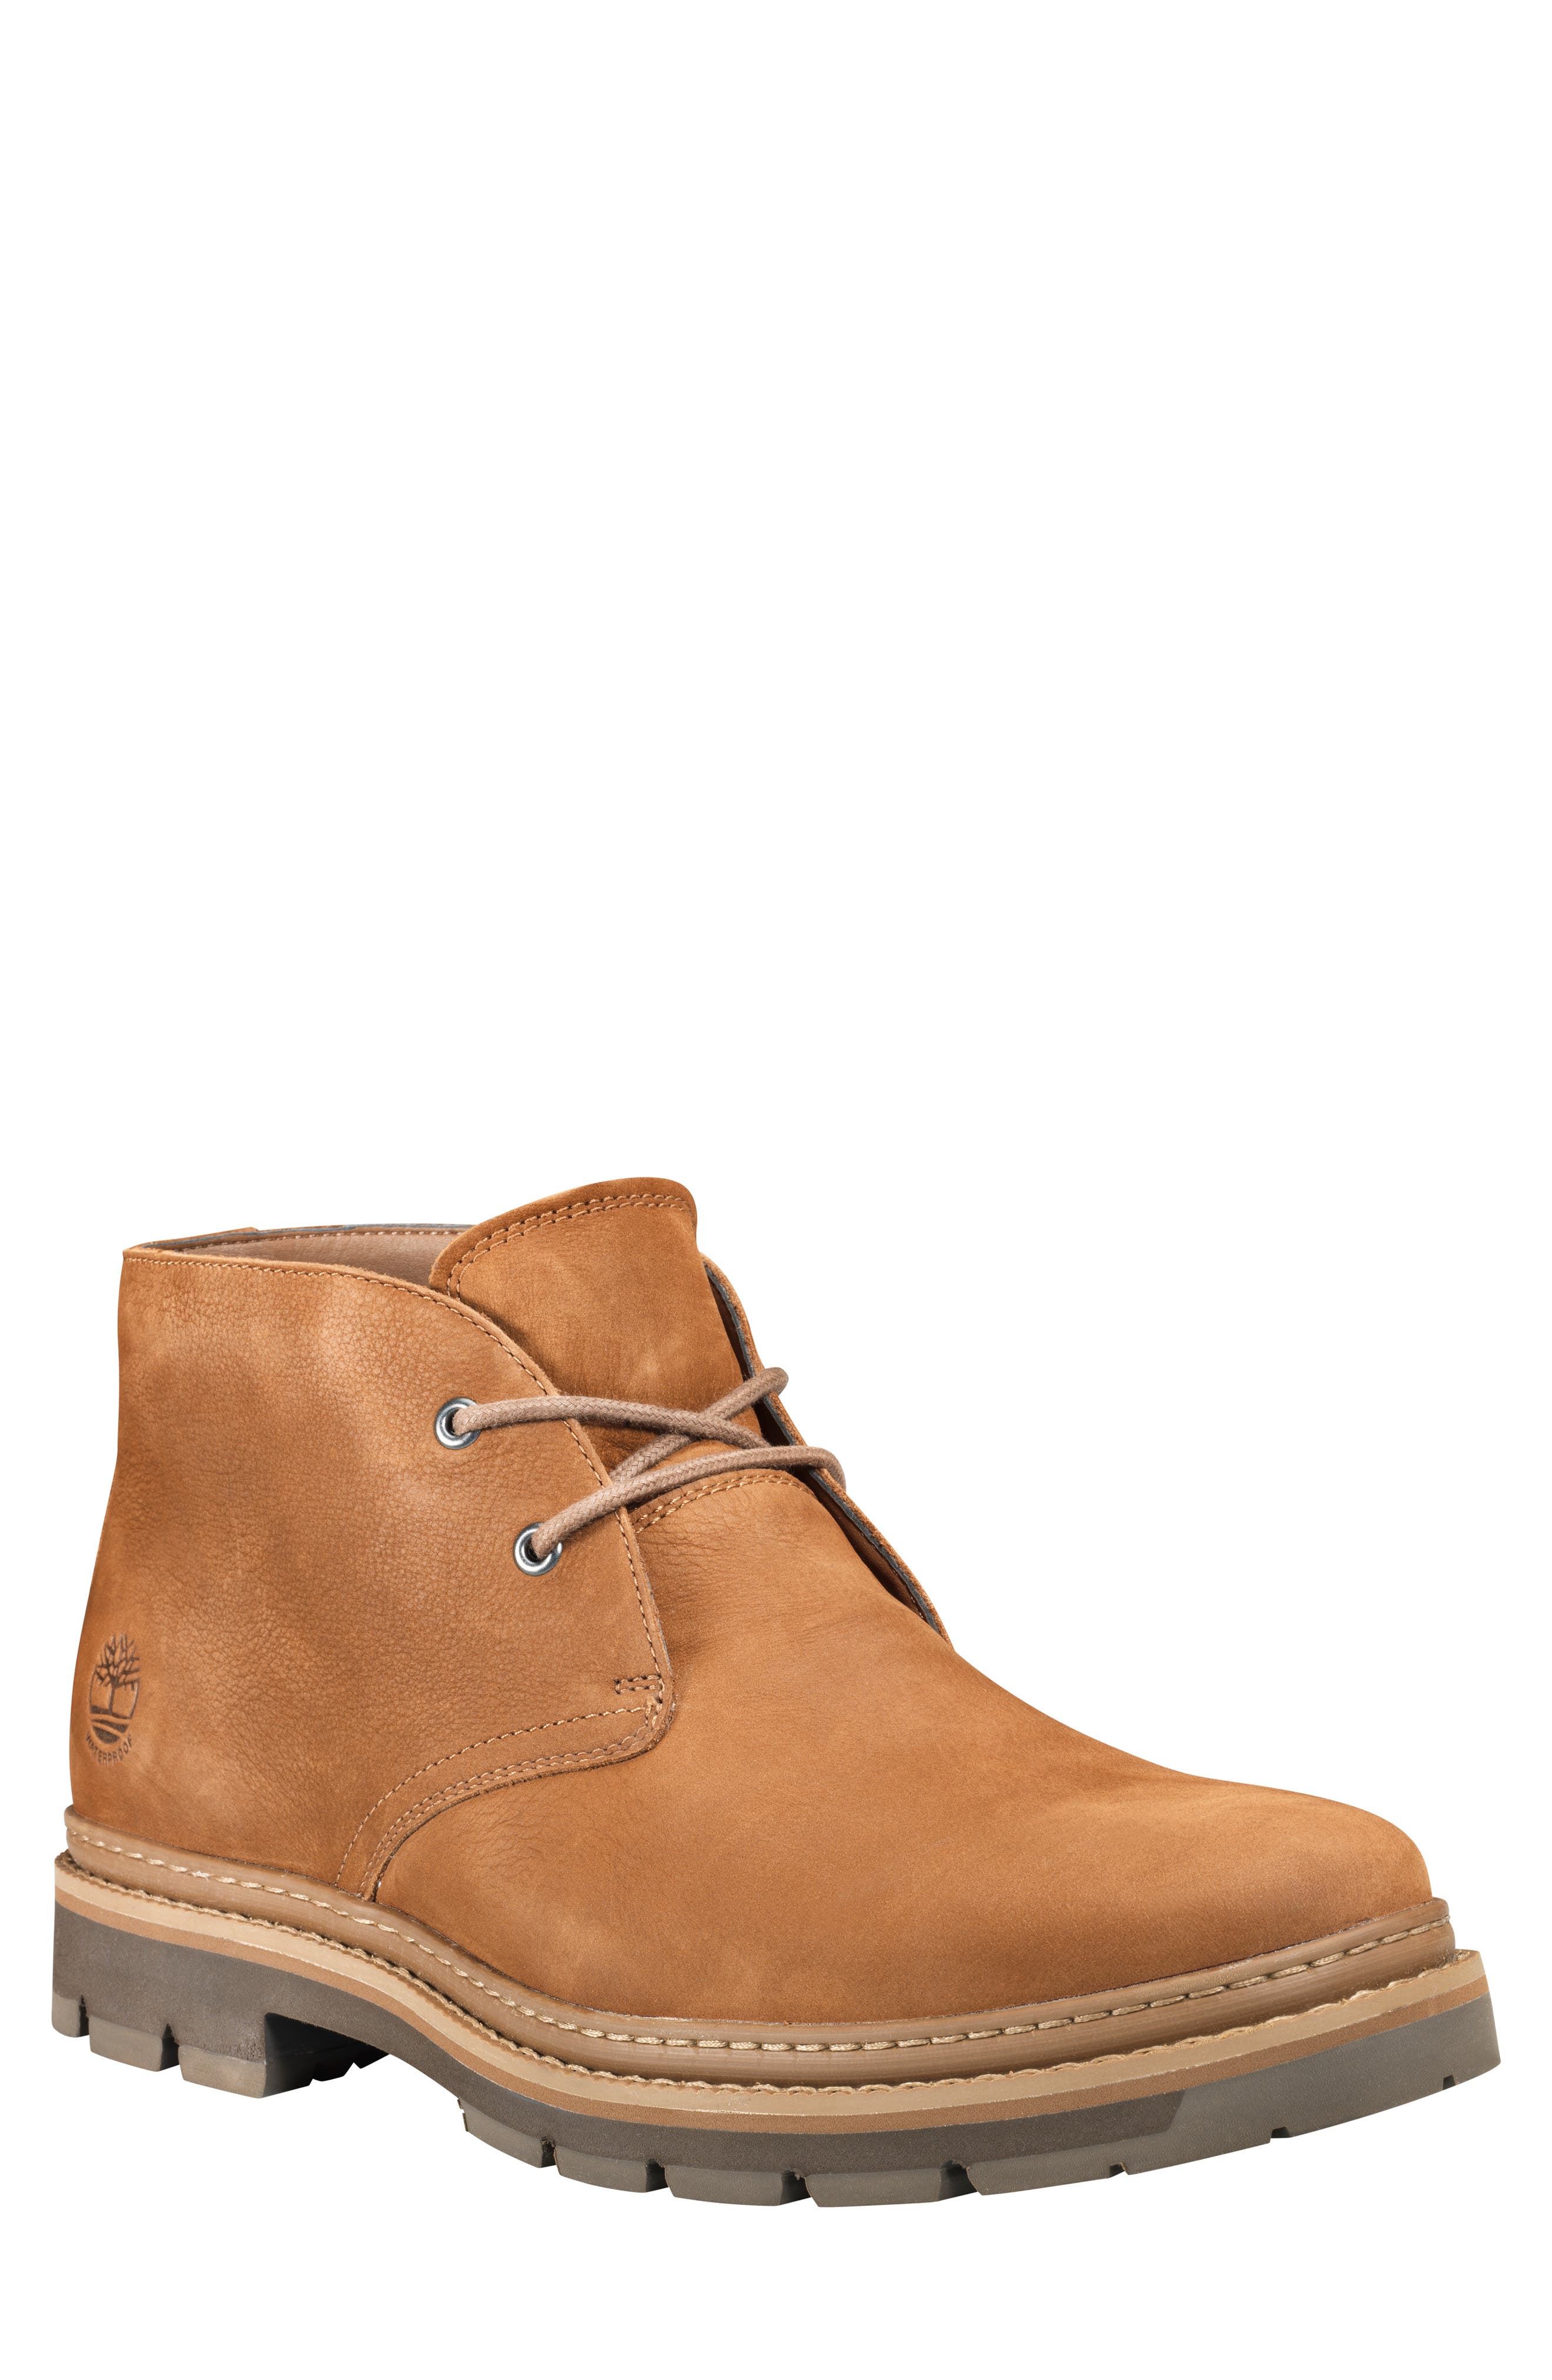 Men's Timberland Shoes | Nordstrom